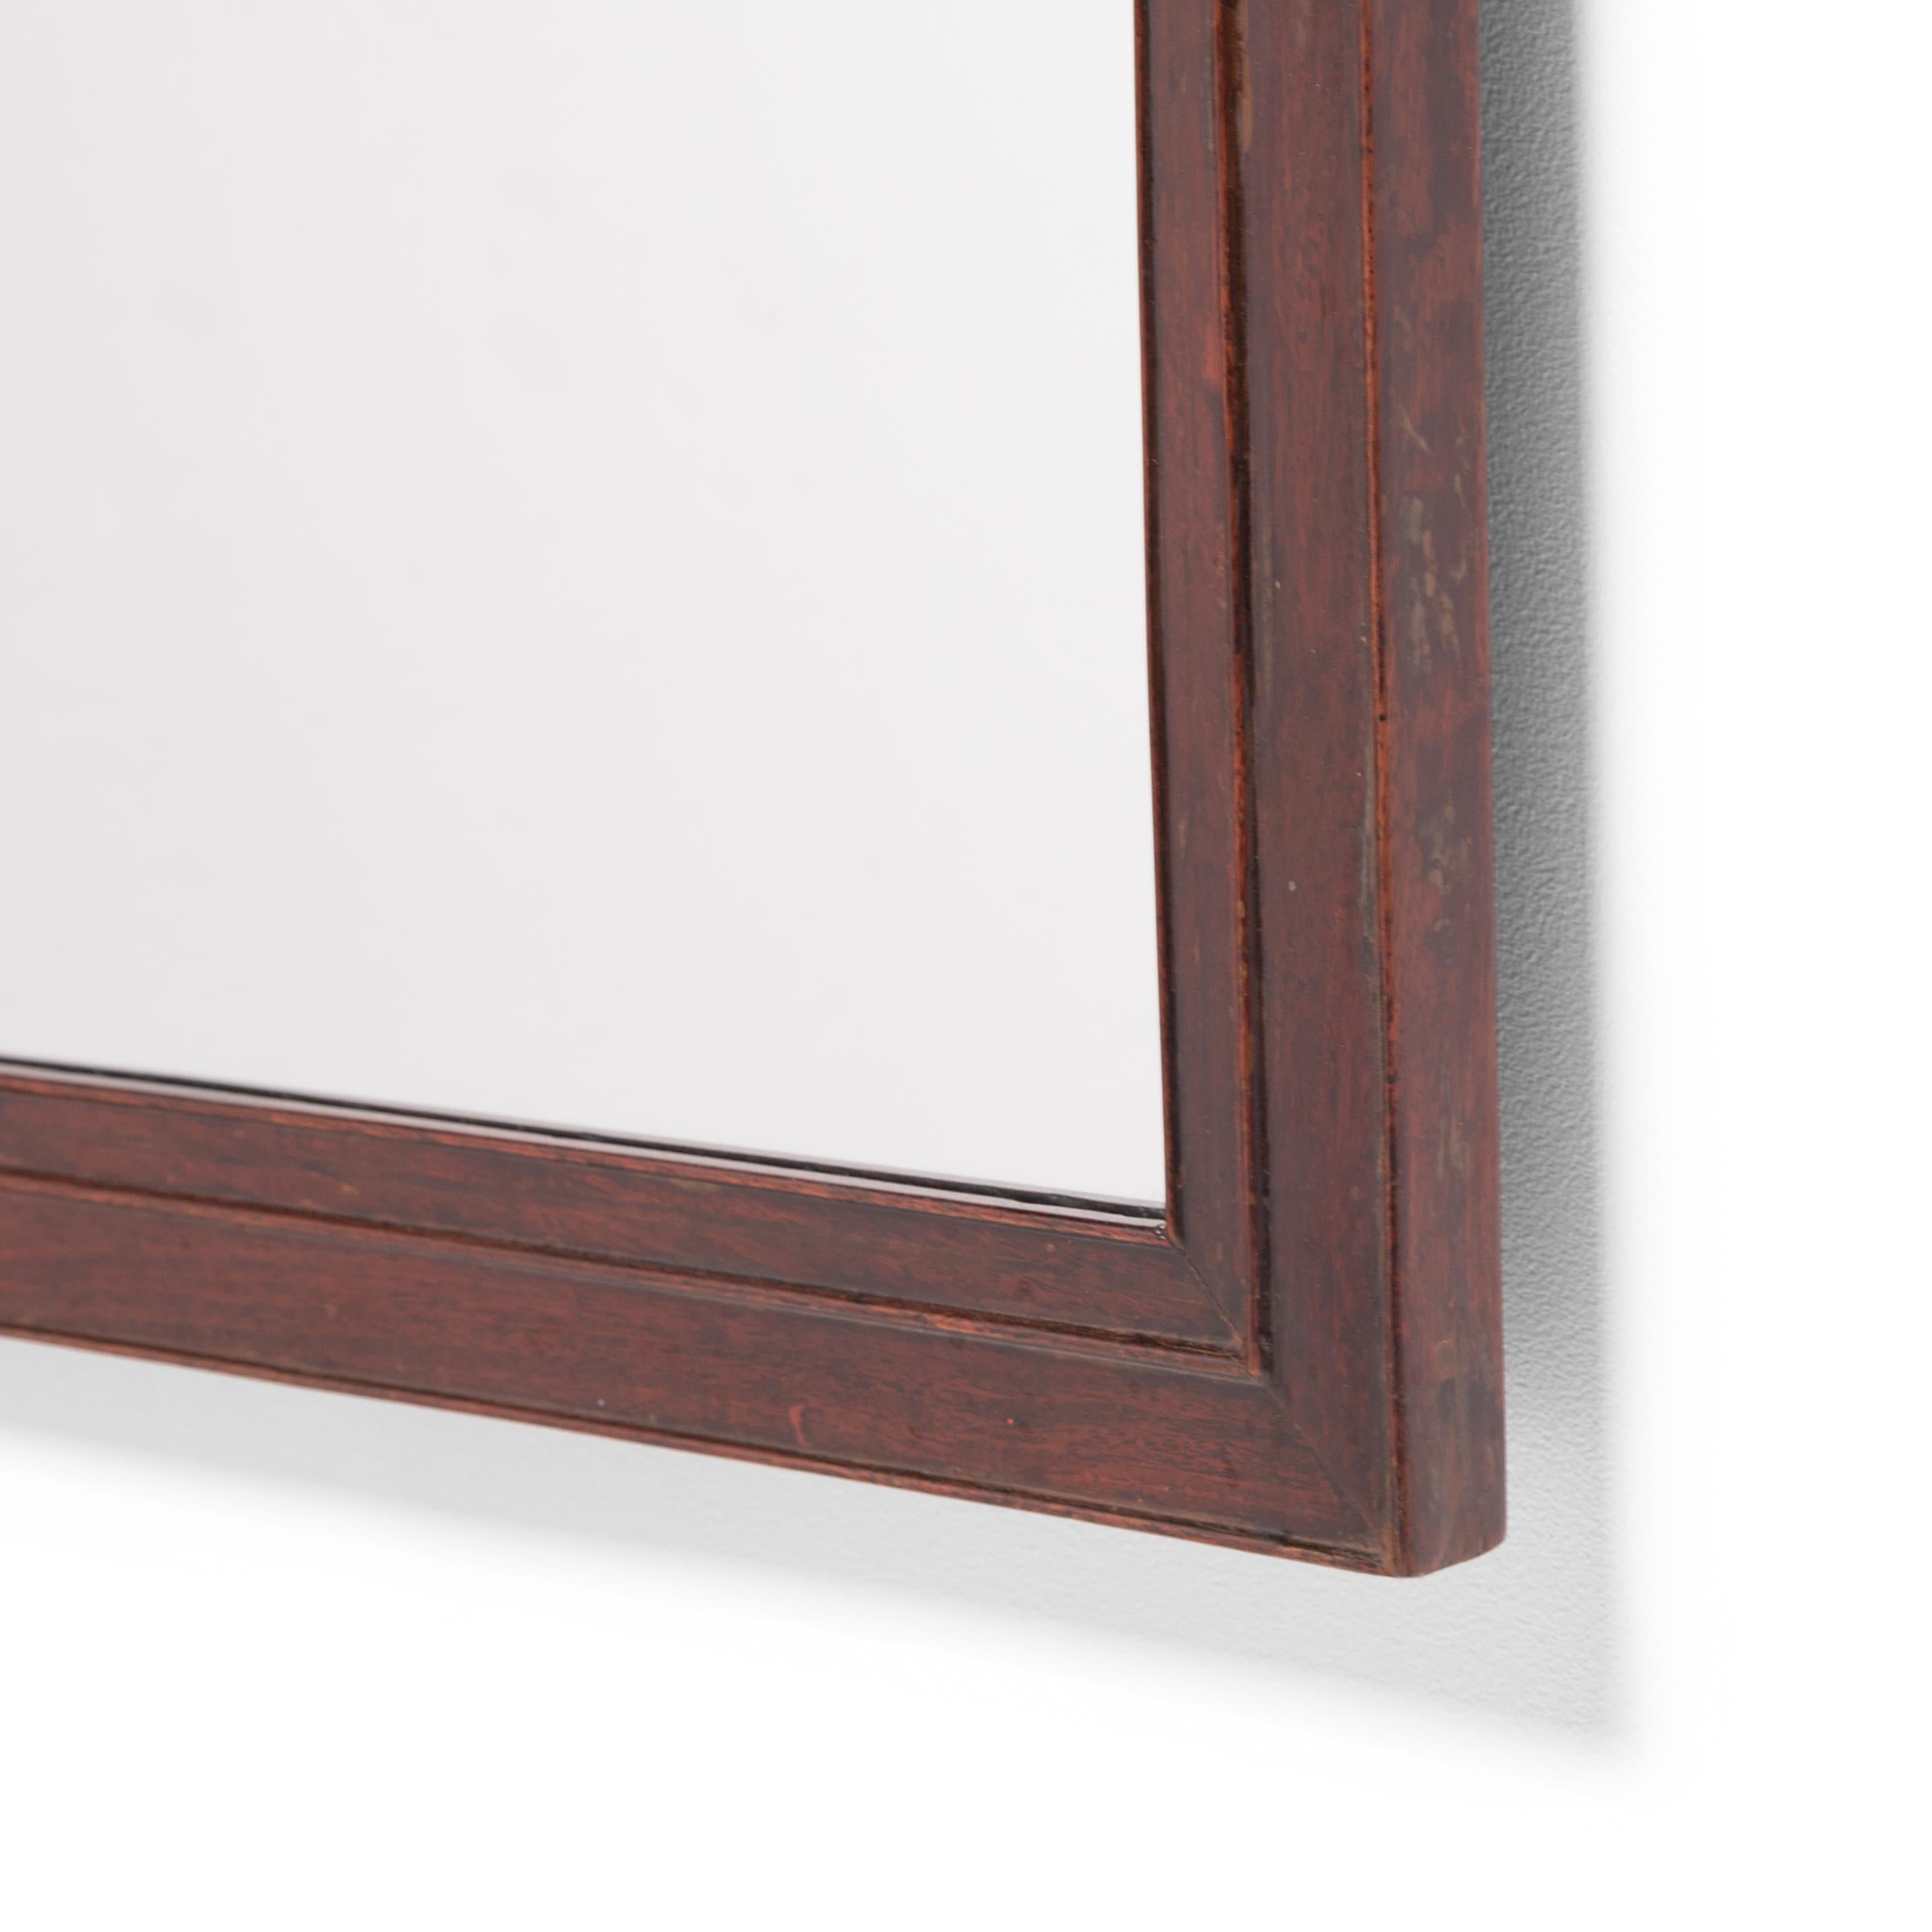 This mid-19th century Chinese scholars' mirror is crafted from a fine hardwood with warm coloring and a tight grain. The corners are mitered and the frame is finished all around with three thin beaded edges. A fresh mirror replaces the lost original.